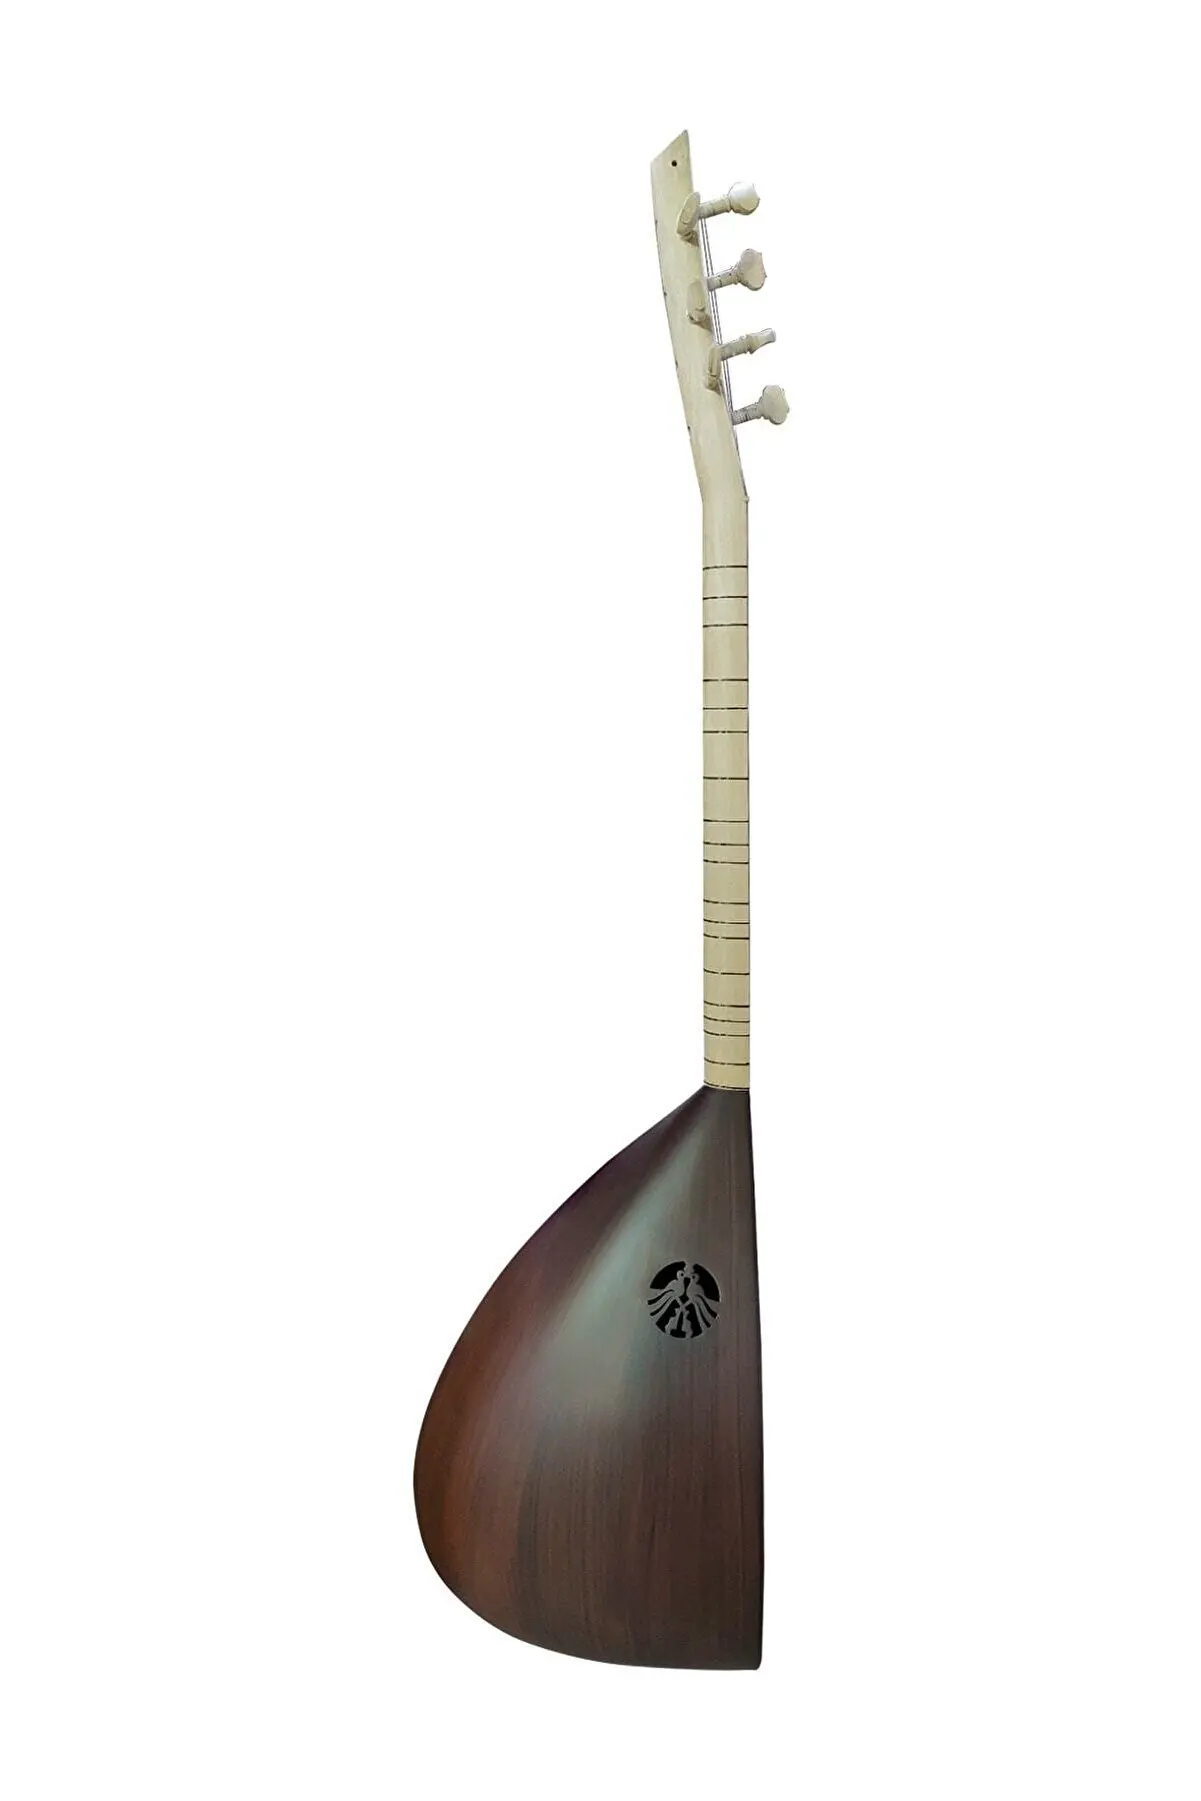 Lacing Leaf Mahogany short handle Bymu + Case Gift or Mulberry natural wood produced musical instruments leisure Reed binding wire çalgı